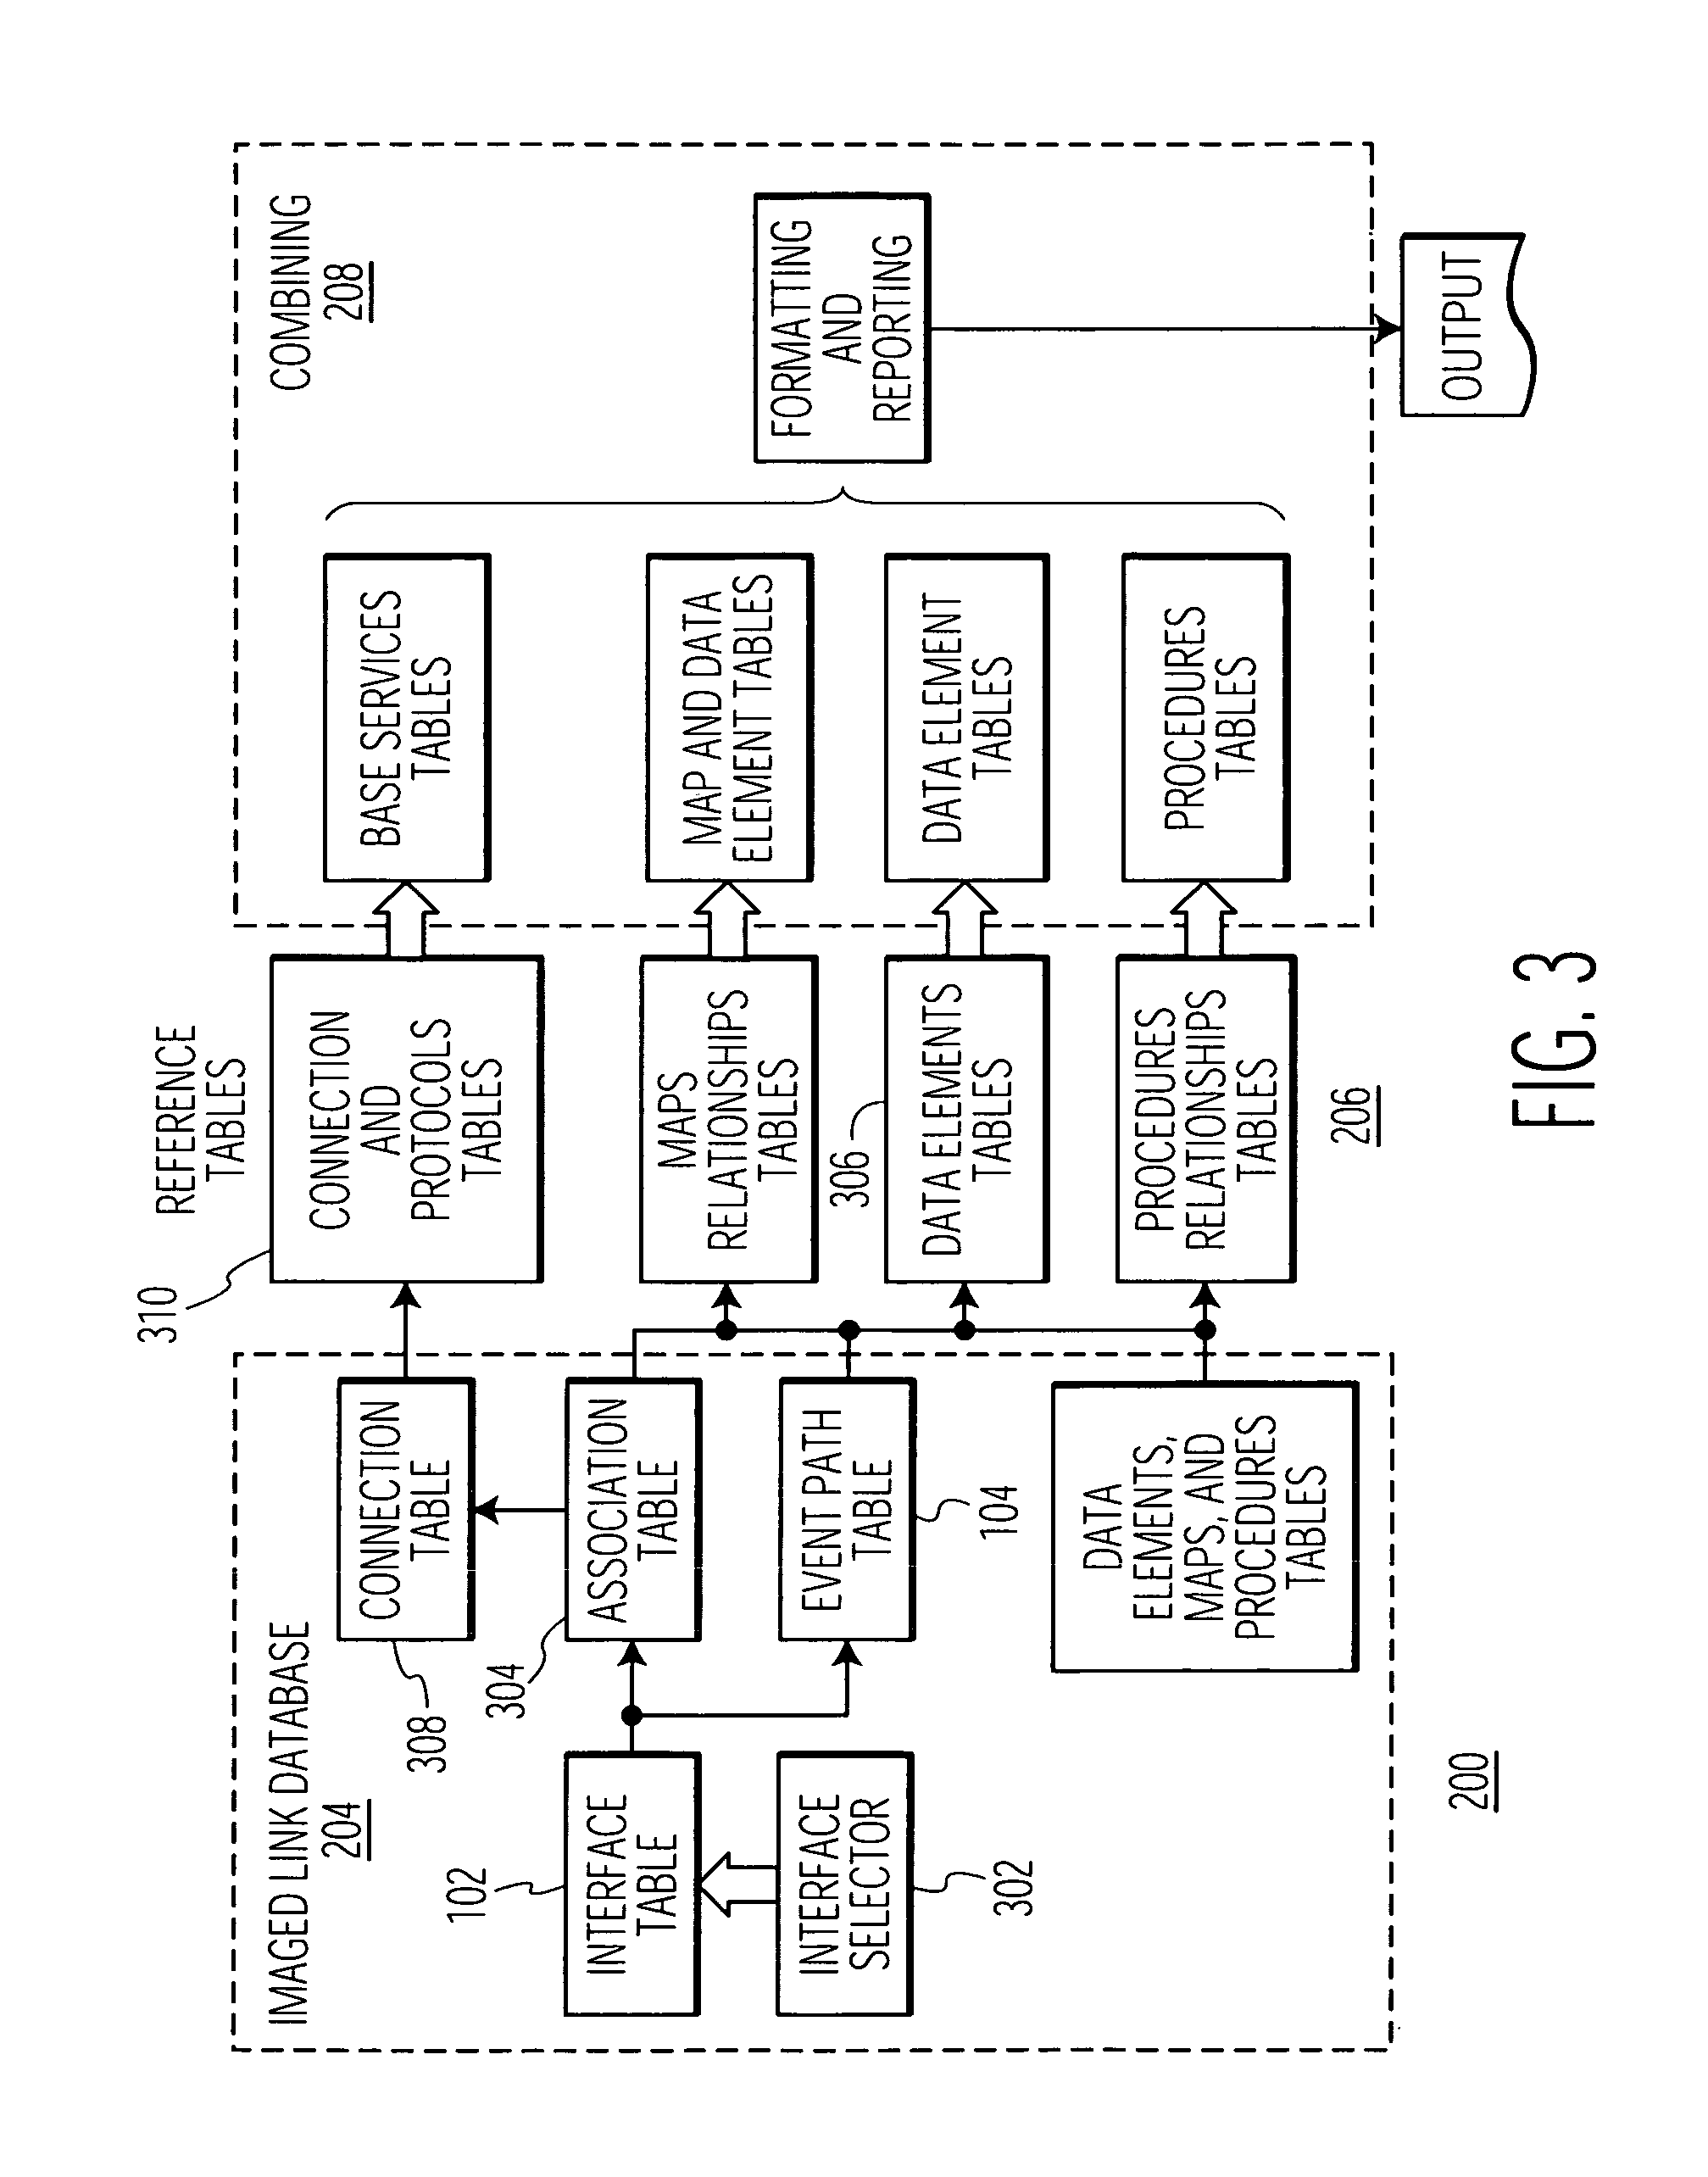 Method for processing information from an information repository